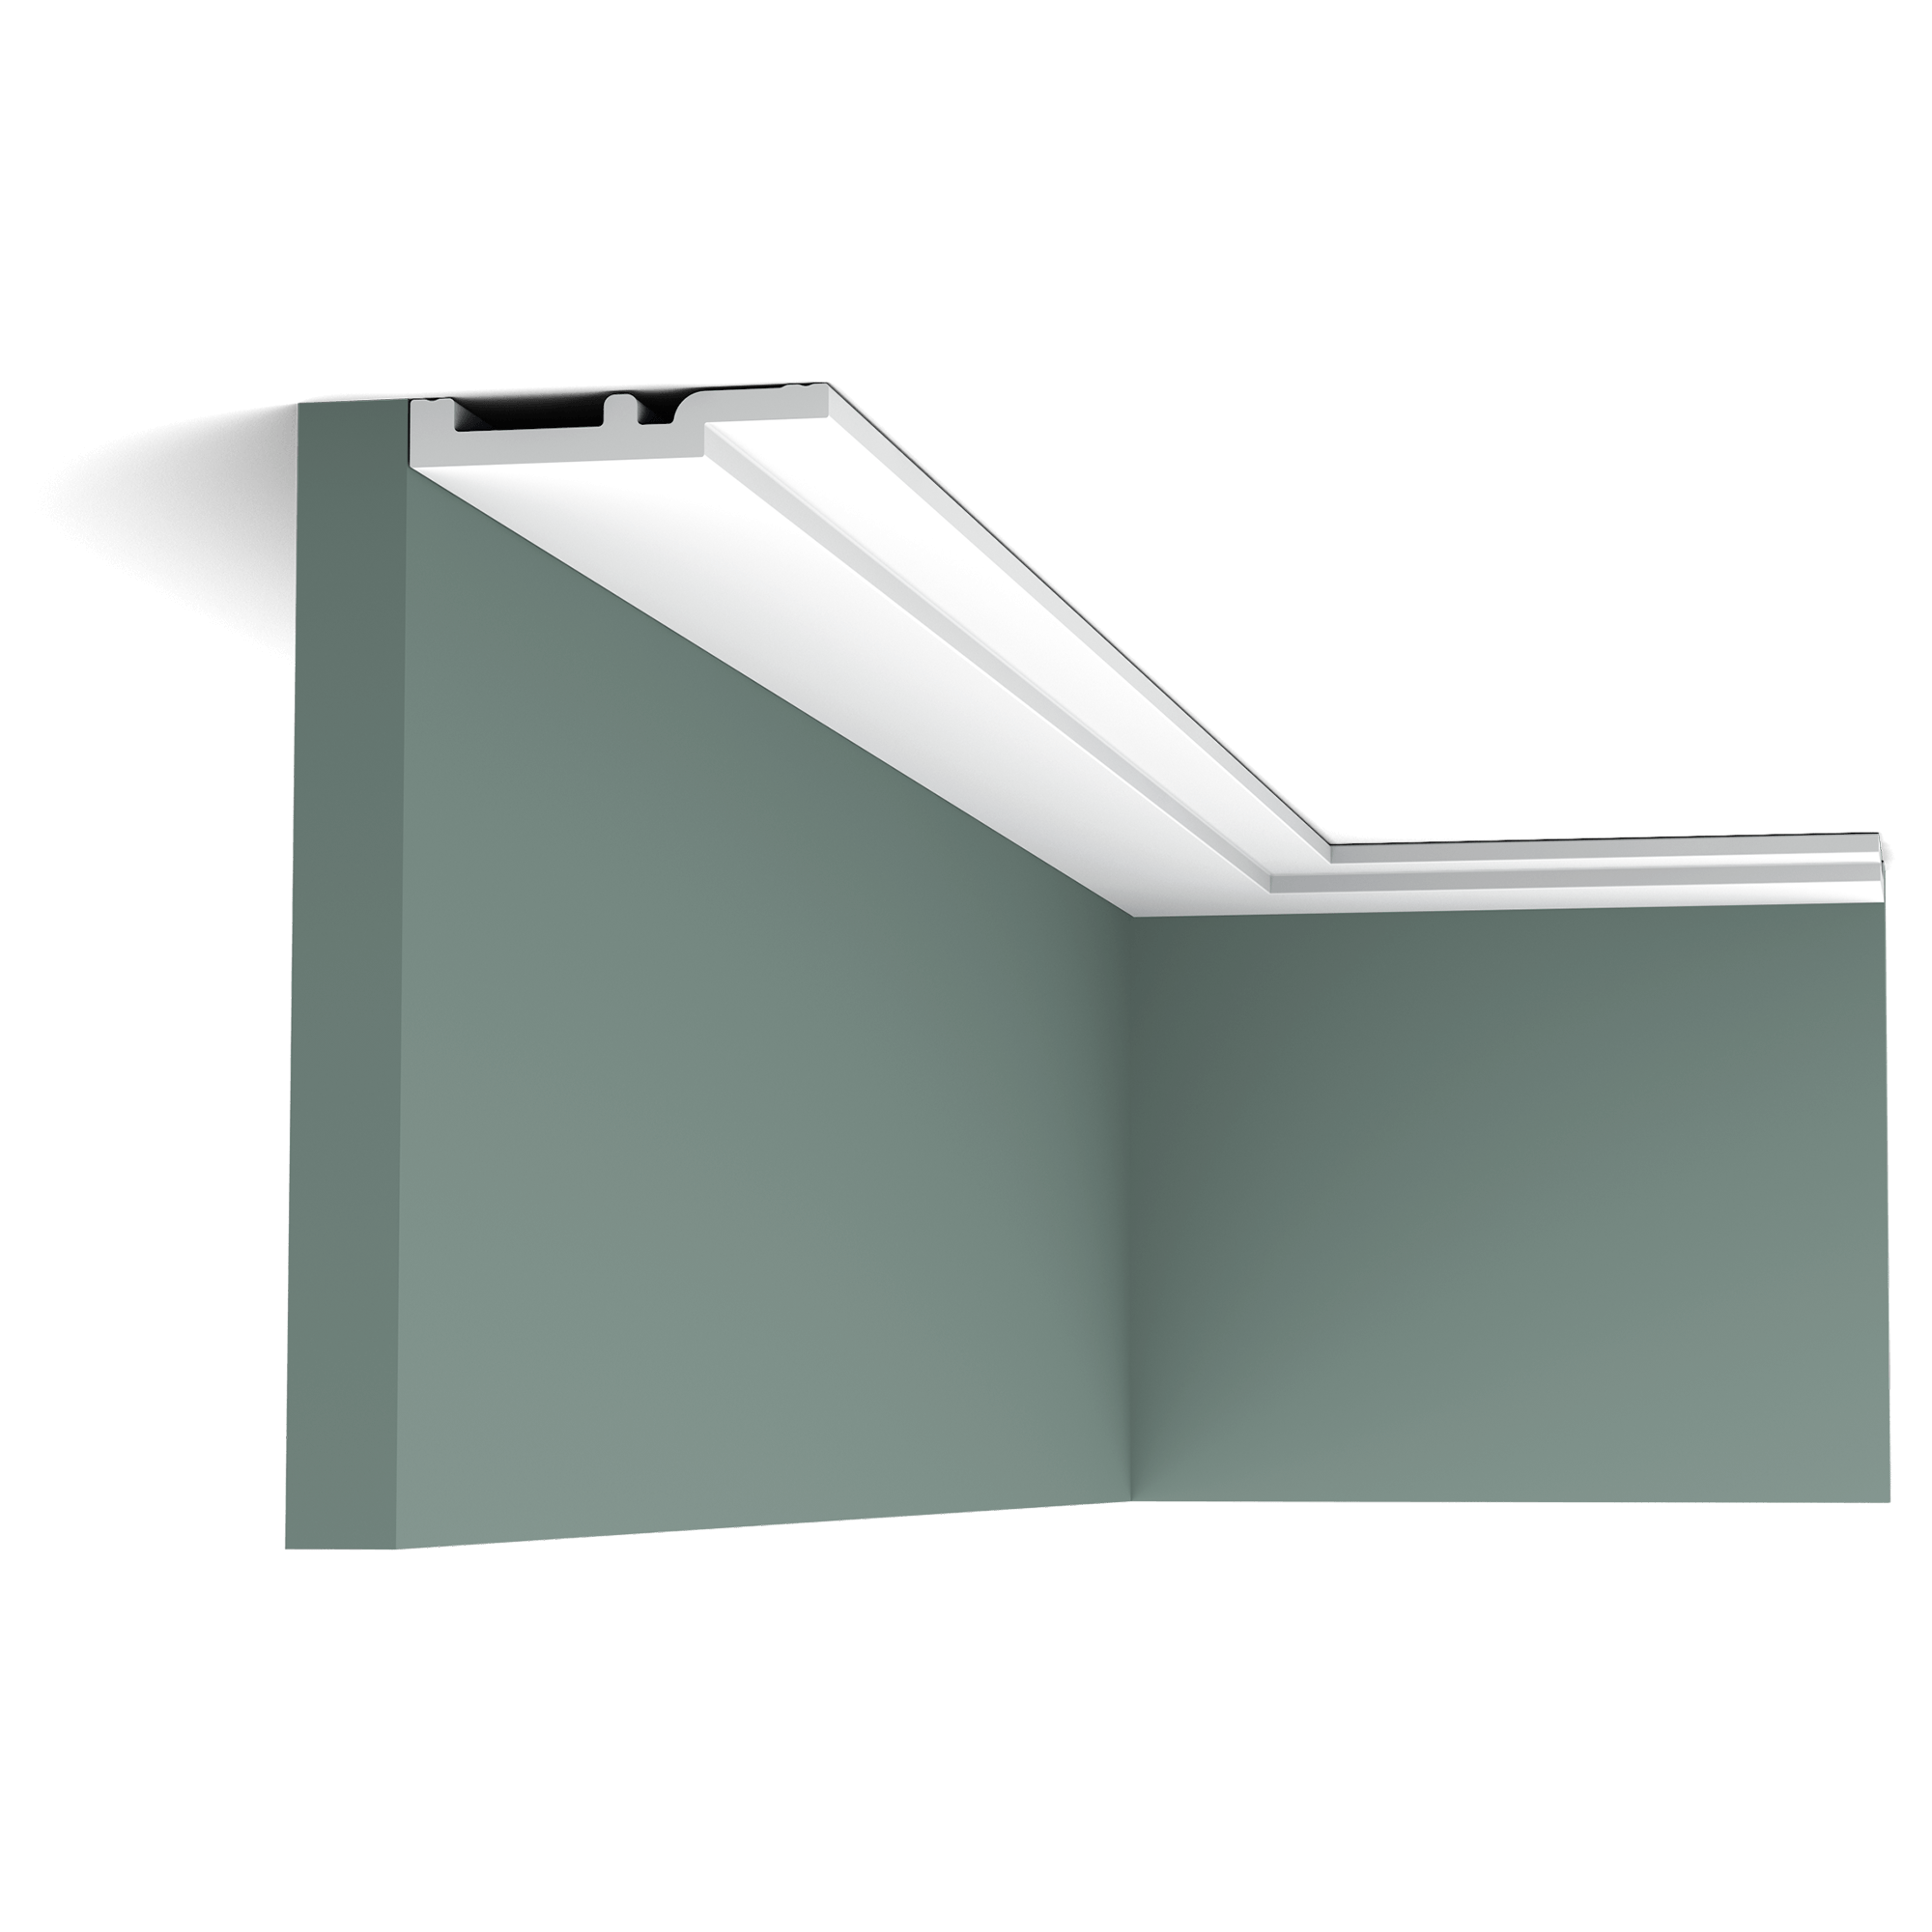 he pure shape and perfect proportions of this smallest High Line cornice moulding create an ideal transition between wall and ceiling. Whichever style of interior you have.